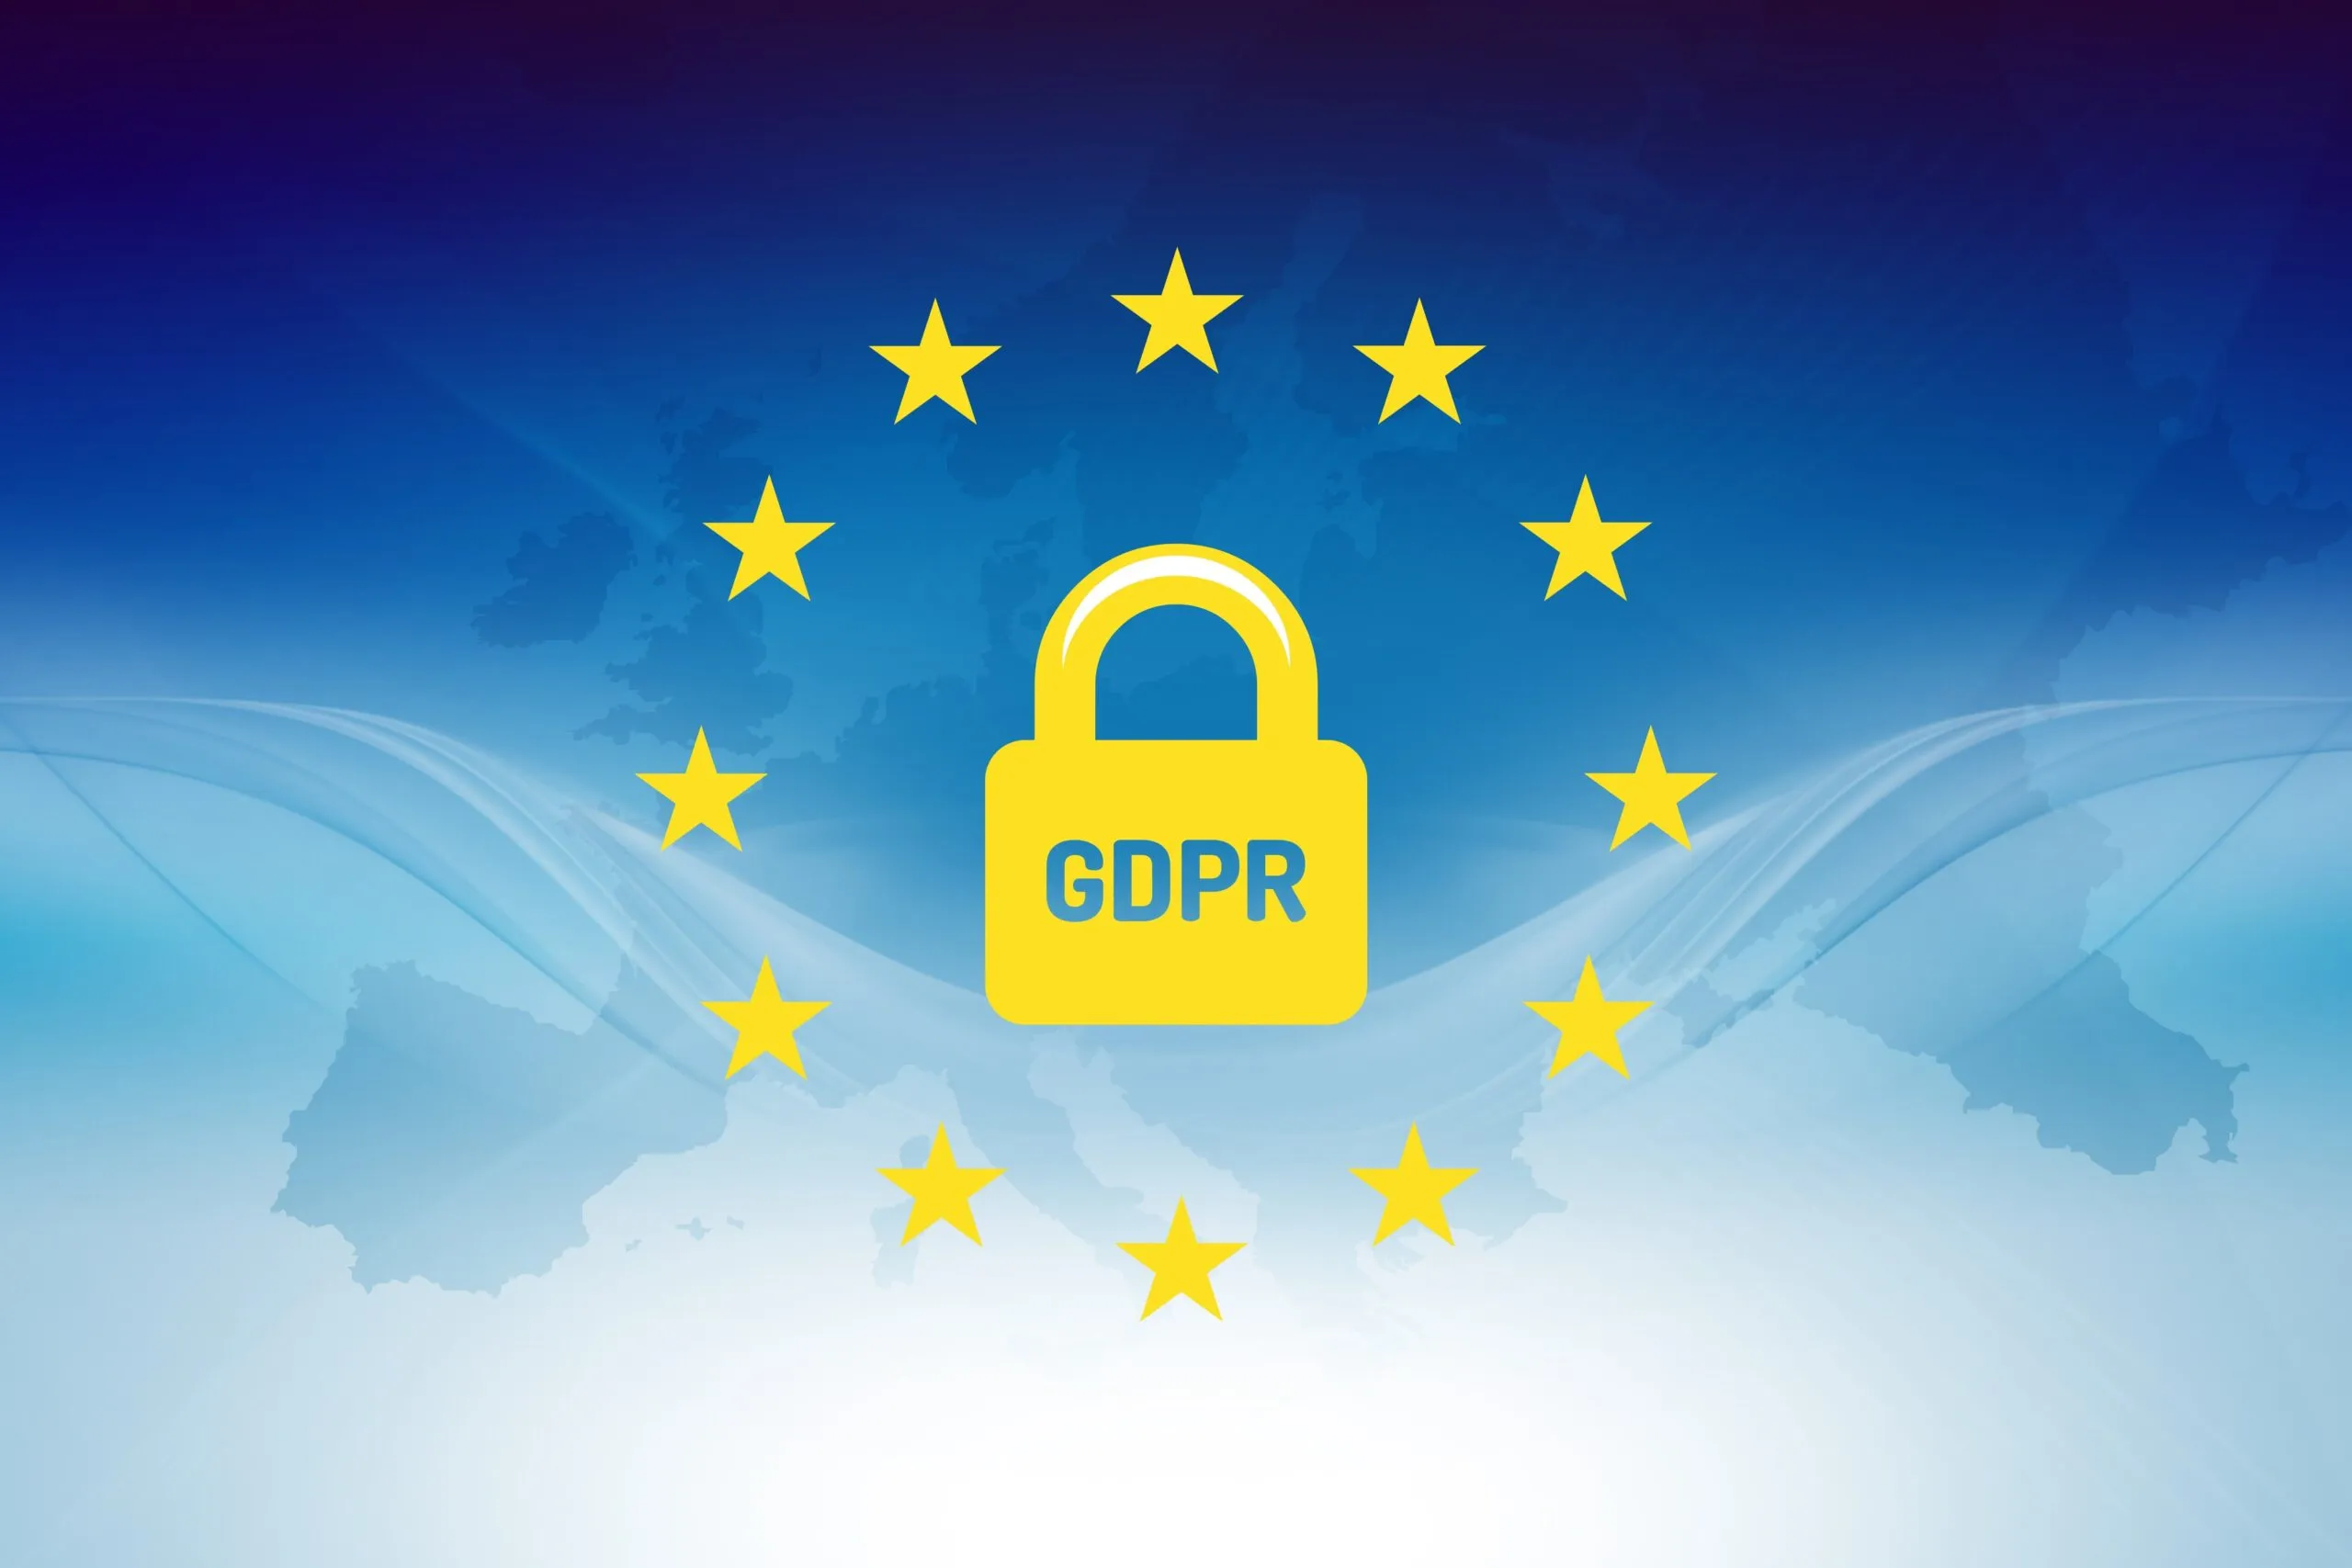 GDPR is a global regulation that applies to all organizations that handle the personal data of individuals who reside in Europe.